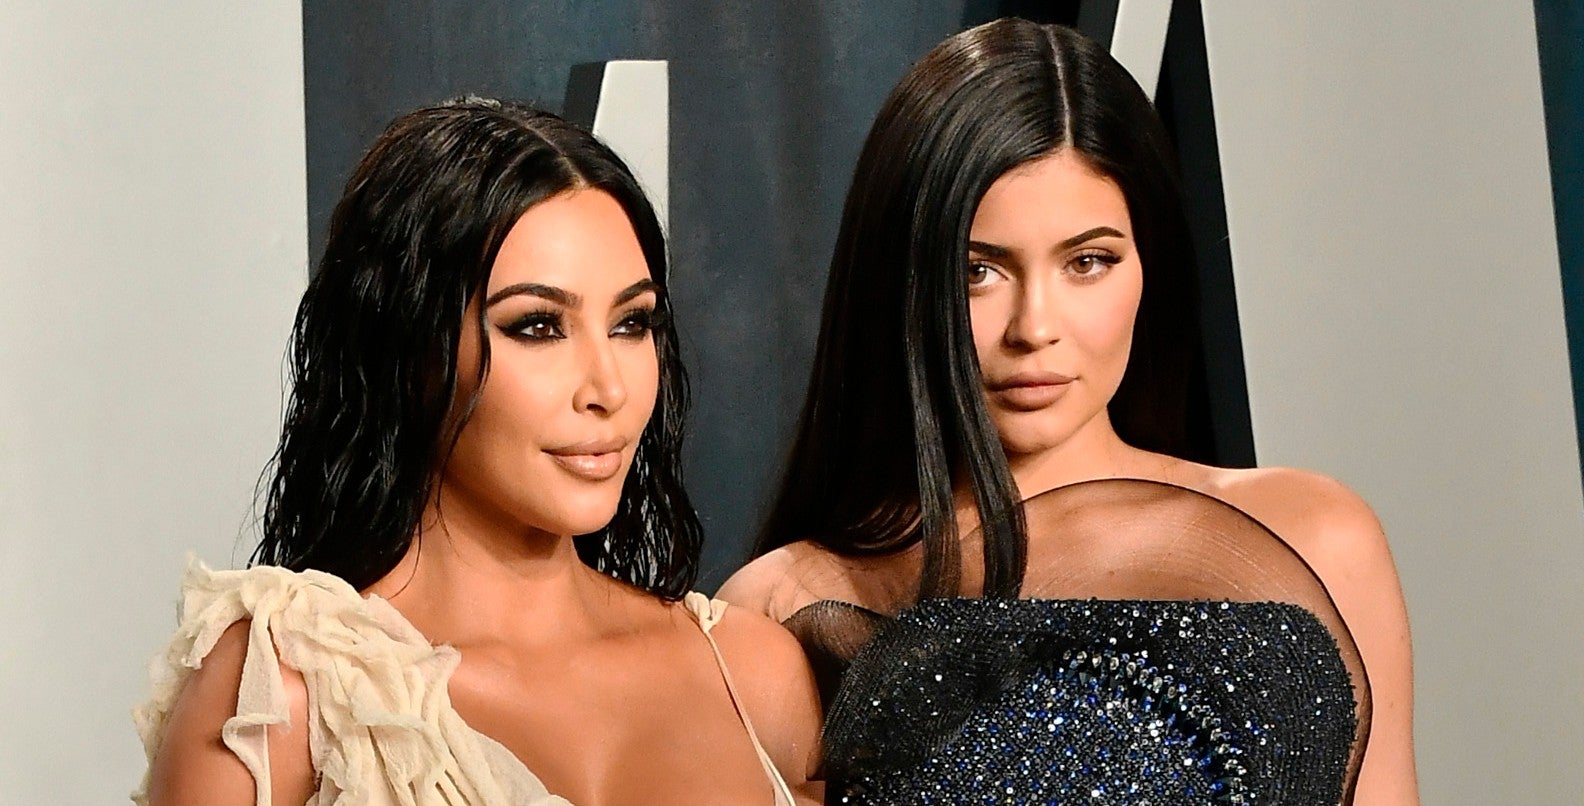 Kylie Jenner shares throwback snap with sister Kendall even though